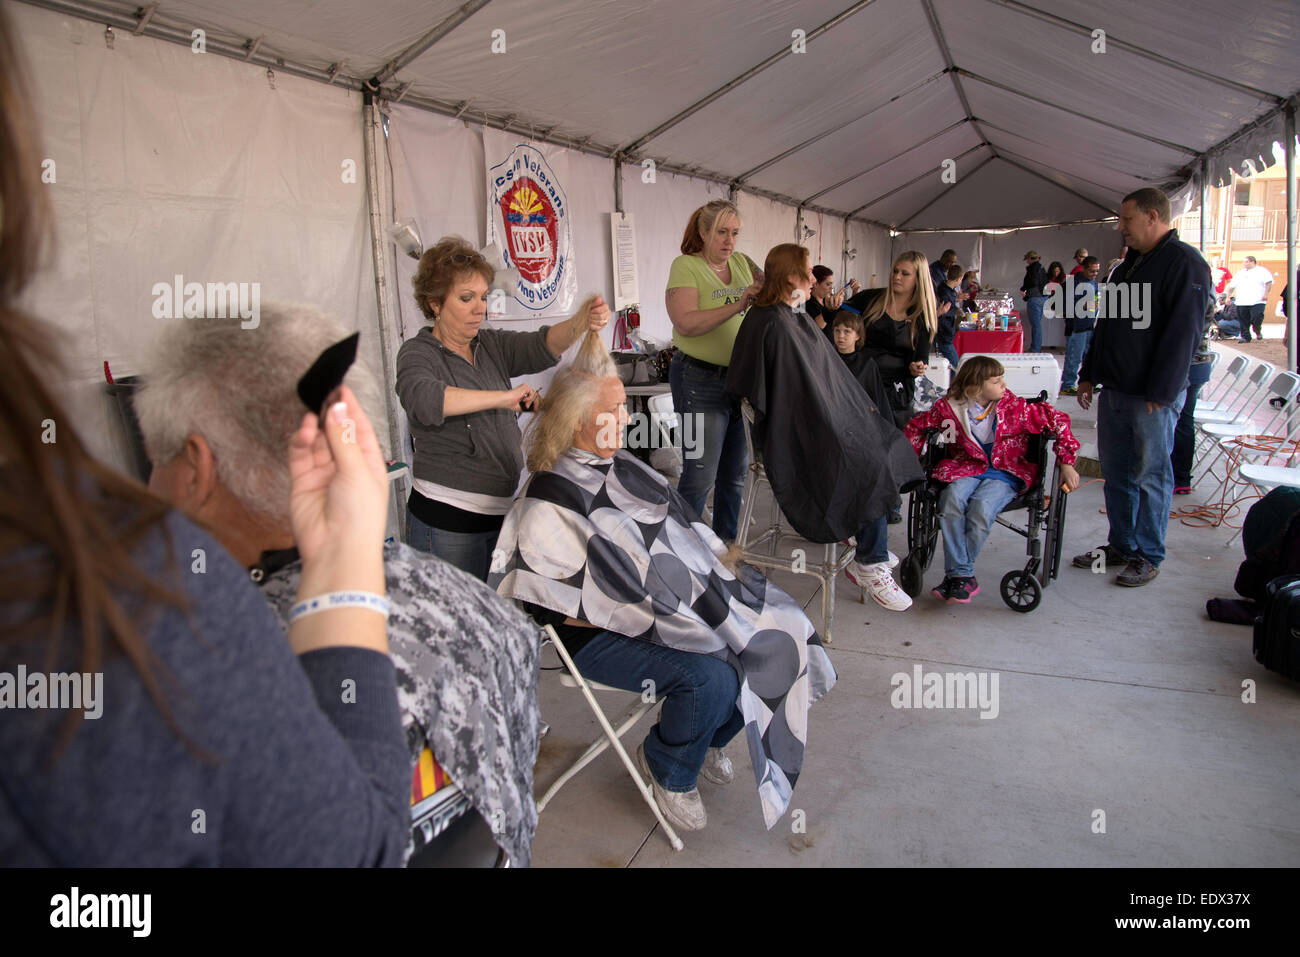 Tucson, Arizona, USA. Jan. 10, 2015. Homeless U.S. military veterans receive medical care, clothing and grooming at the 16th biannual Stand Down event hosted by Tucson Veterans Serving Veterans.  The U.S. Department of Housing and Urban Development estimated in January of 2014 that 49,933 American military veterans are homeless. Credit:  Norma Jean Gargasz/Alamy Live News Stock Photo